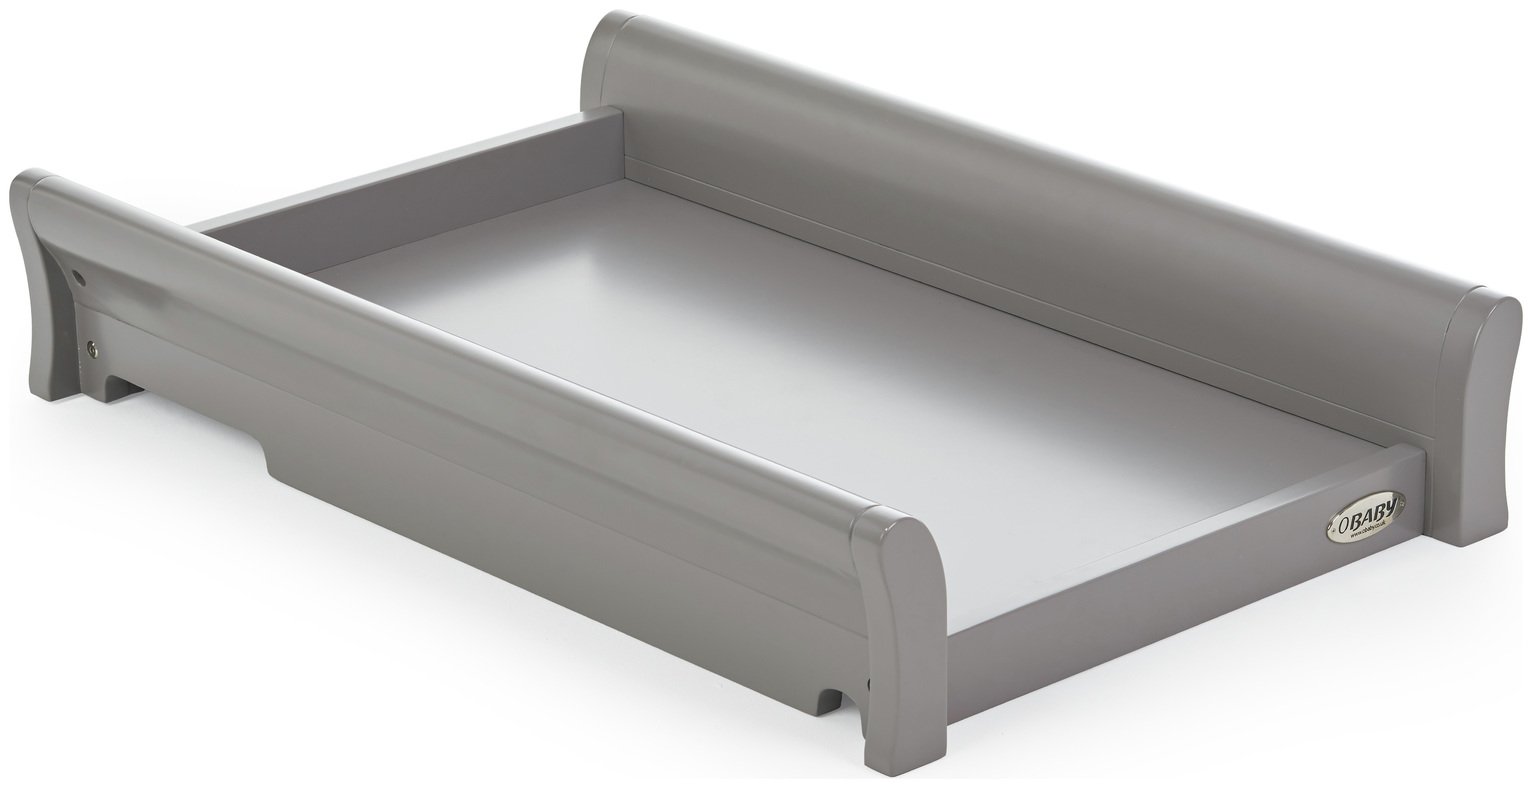 white cot top changer